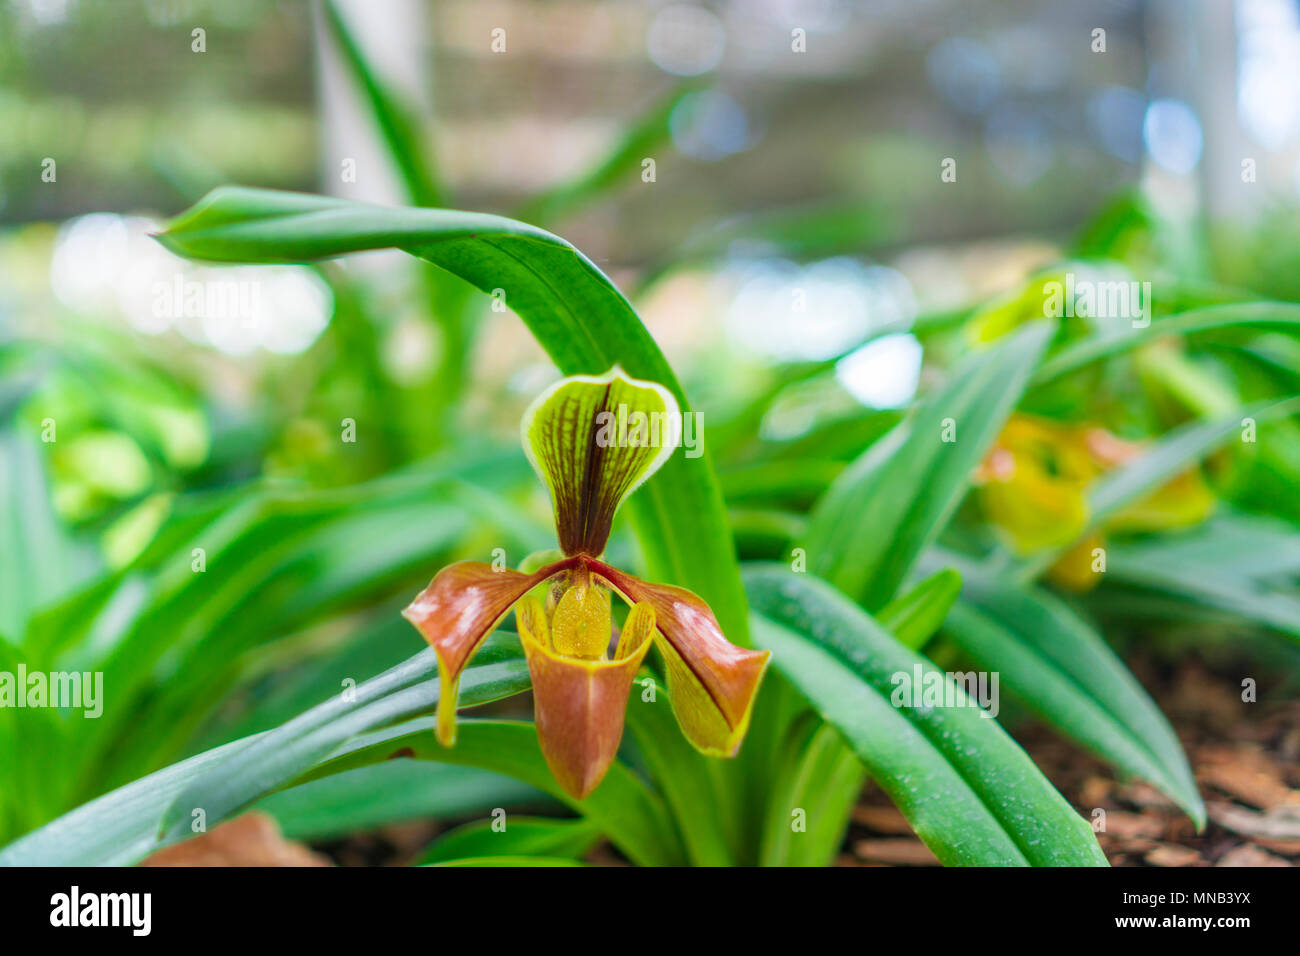 Paphiopedilum orchid flower or Lady's Slipper orchid in Conservation Center Paphiopedilum Doi Inthanon , Chiang Mai, Thailand. Stock Photo